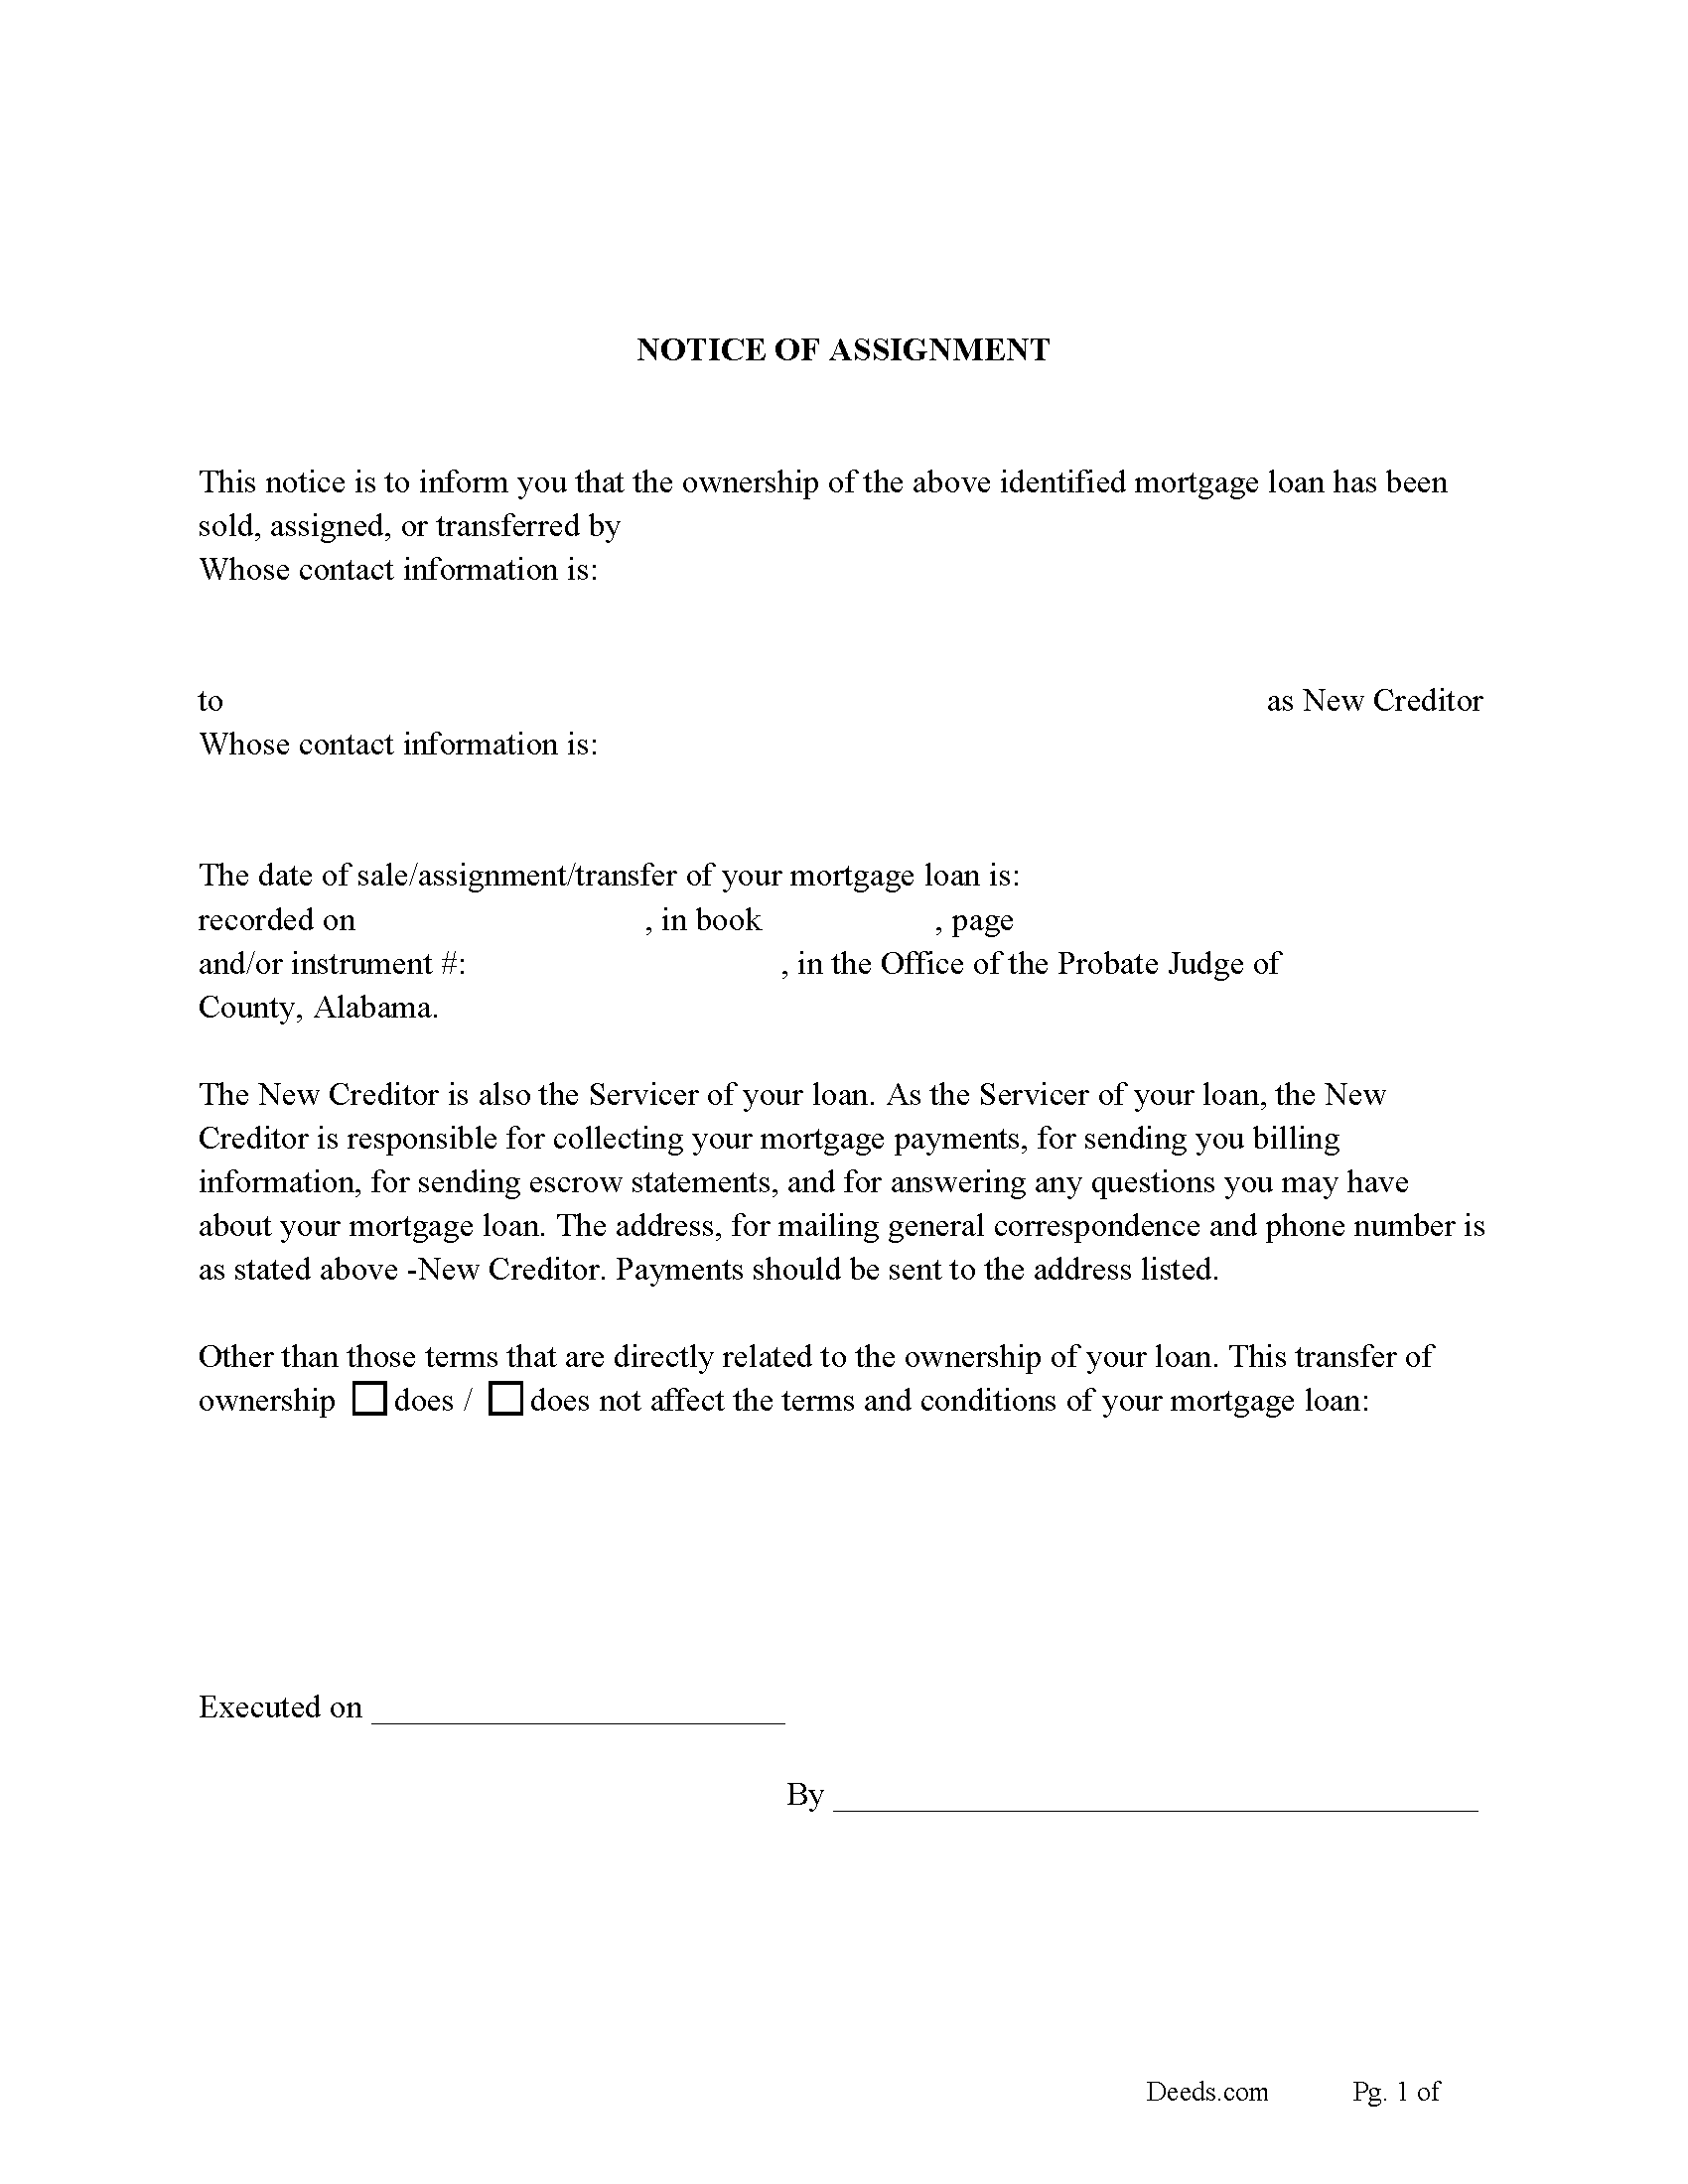 Notice of Assignment of Mortgage